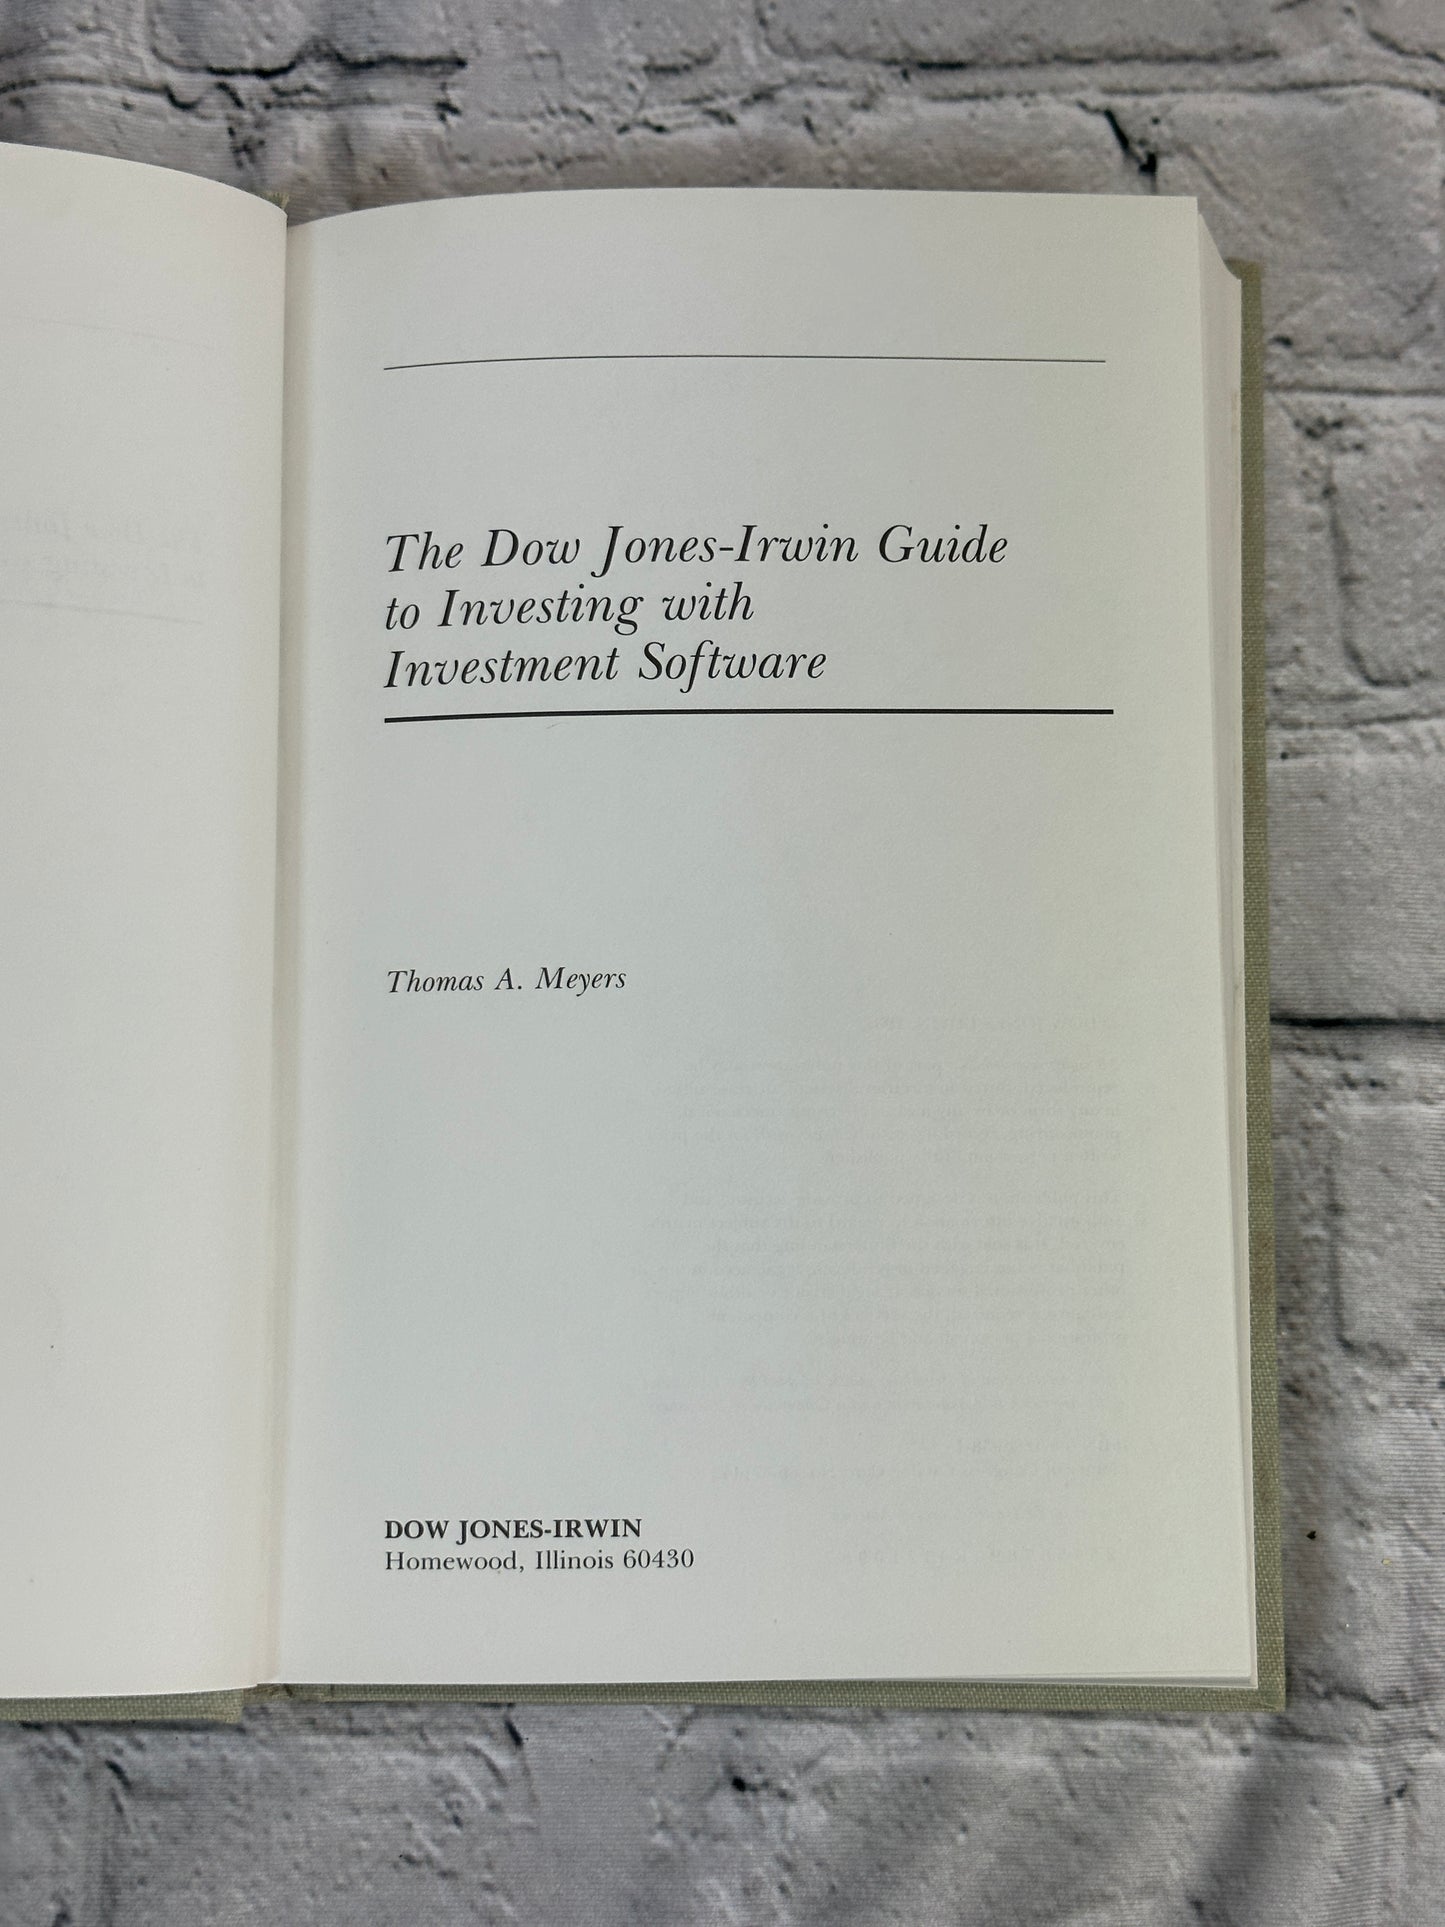 Dow Jones-Irwin Guide To Trading Systems by Thomas Meyers [1987]